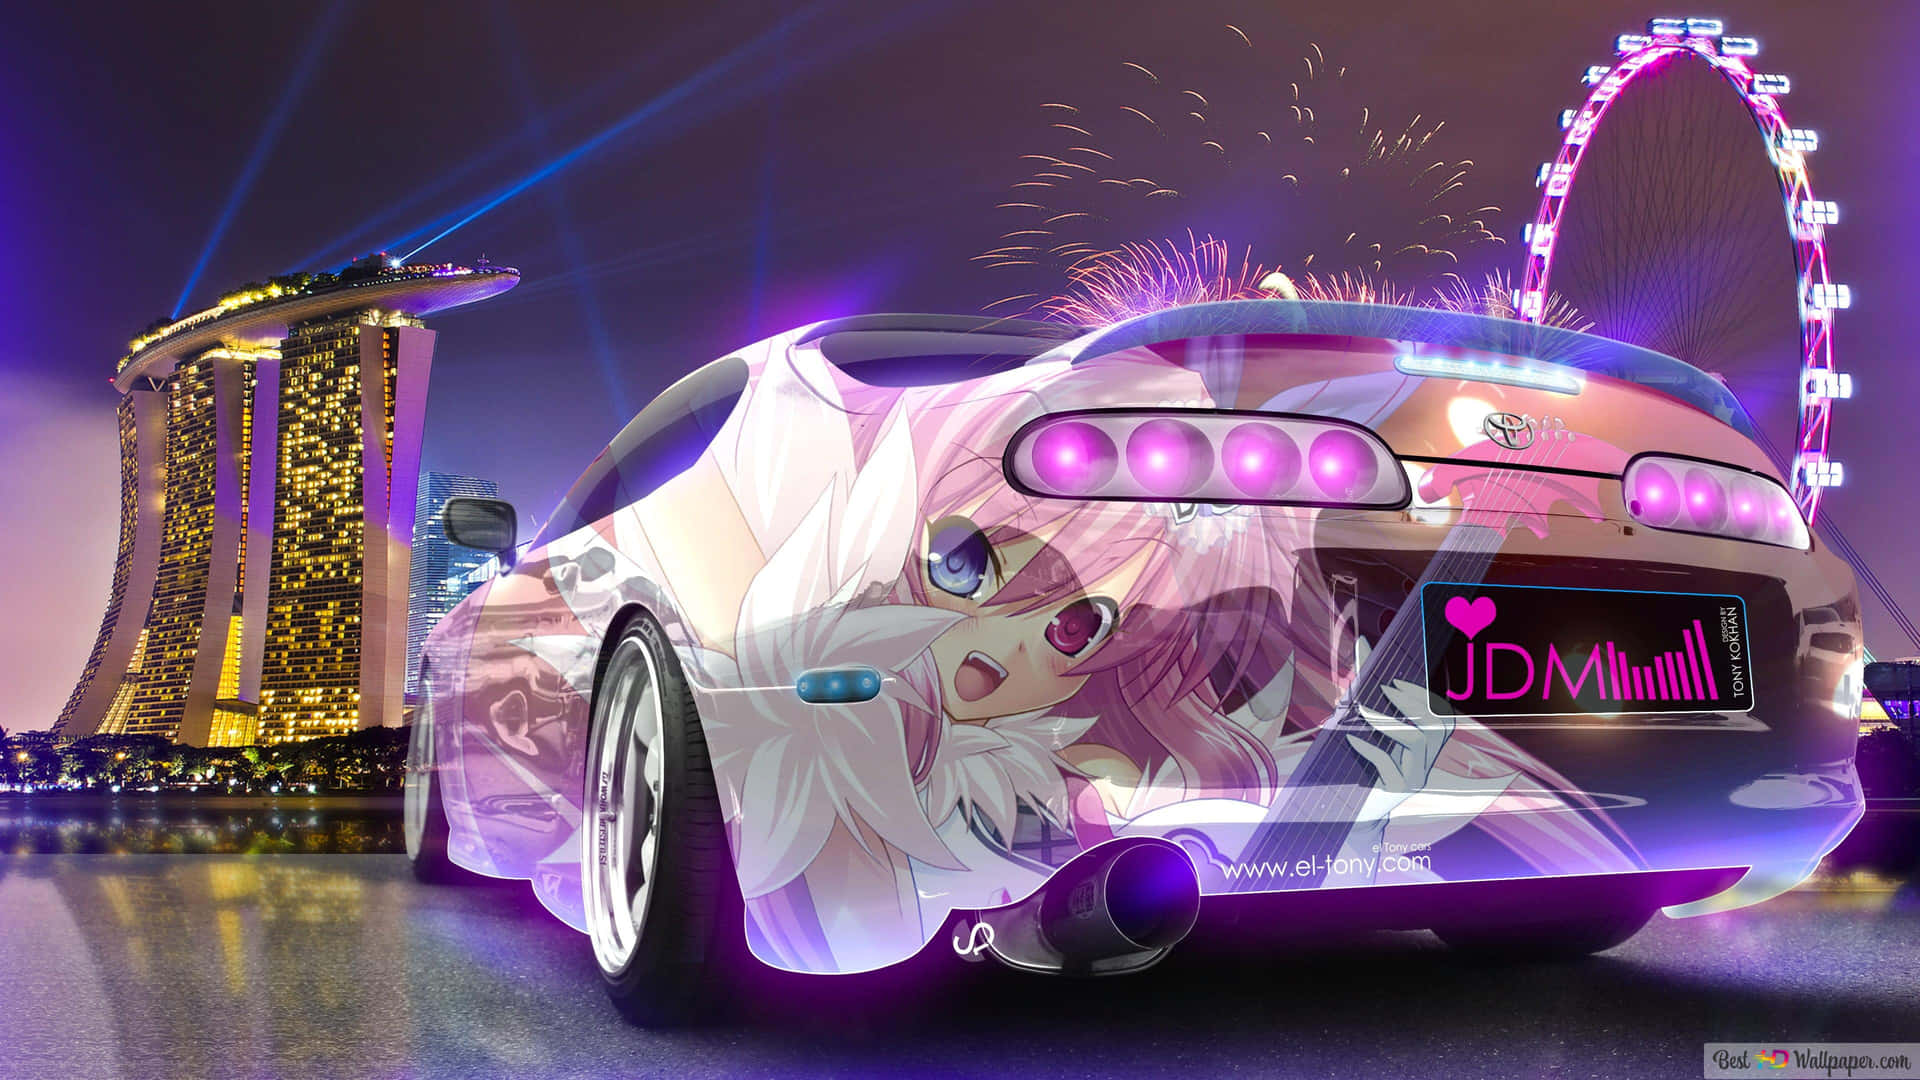 Rev the Engine in this Iconic Jdm Supra Wallpaper